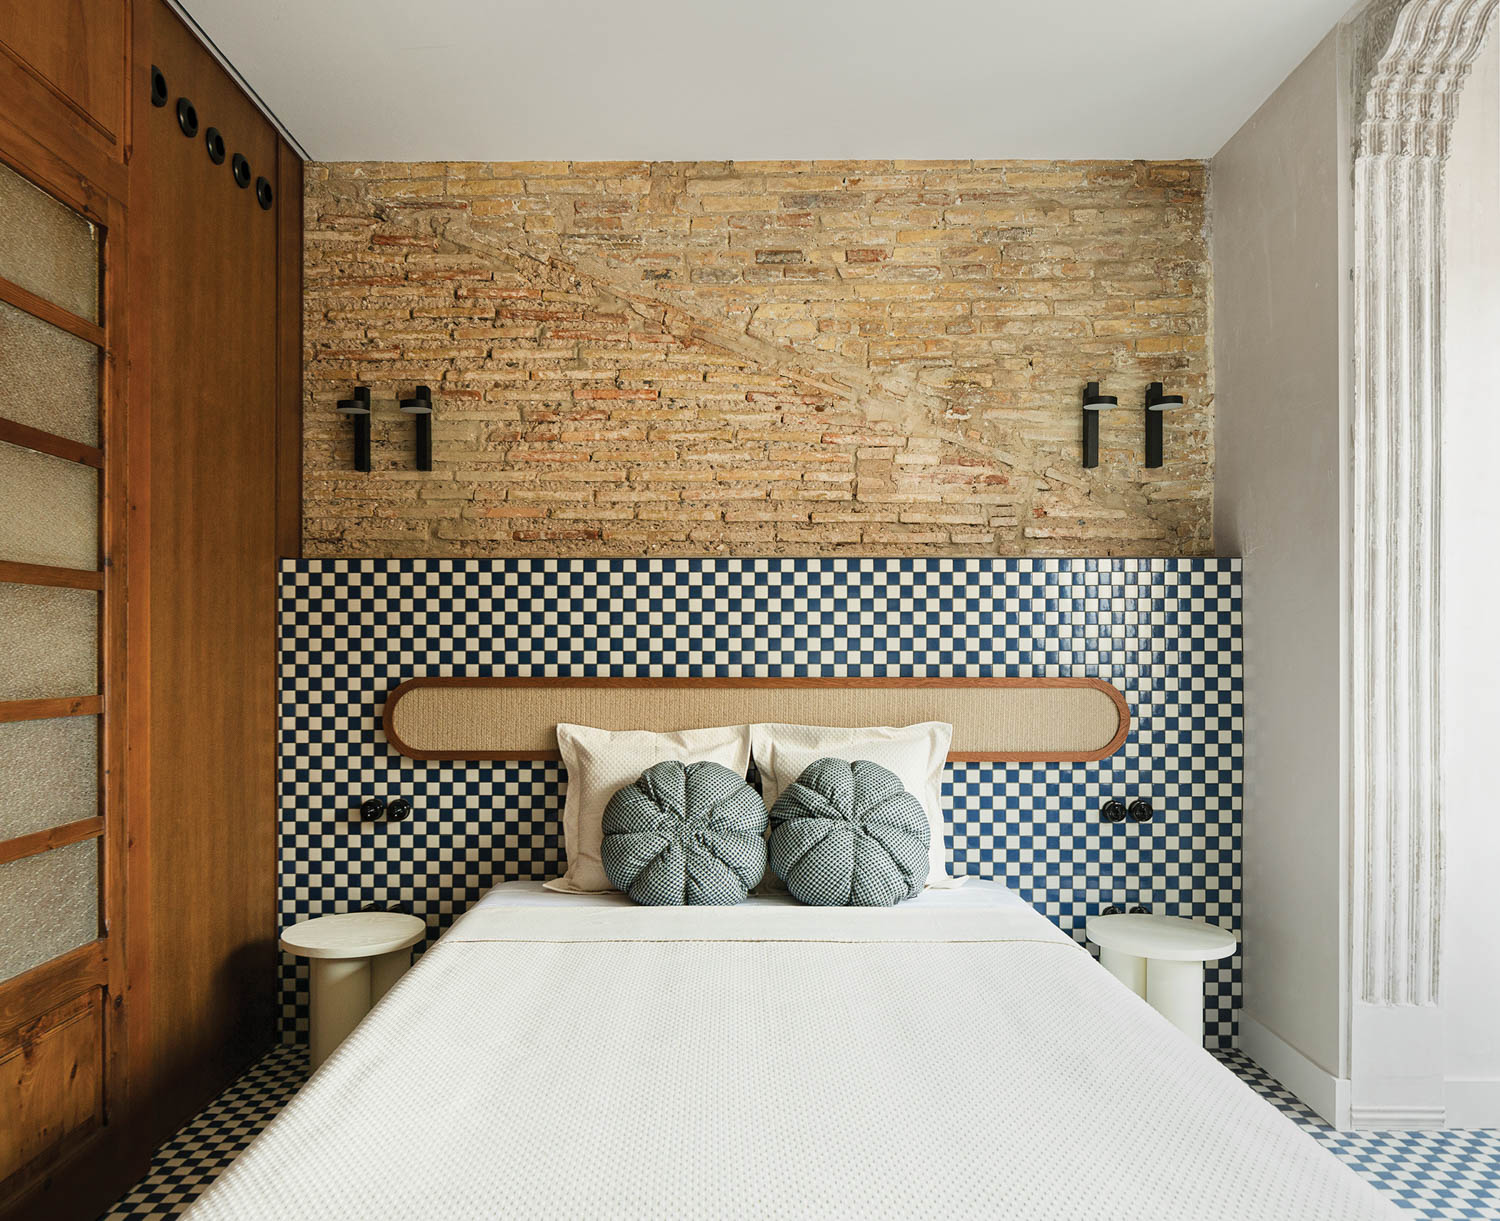 blue and white checkerboard headboard connects to brick above it